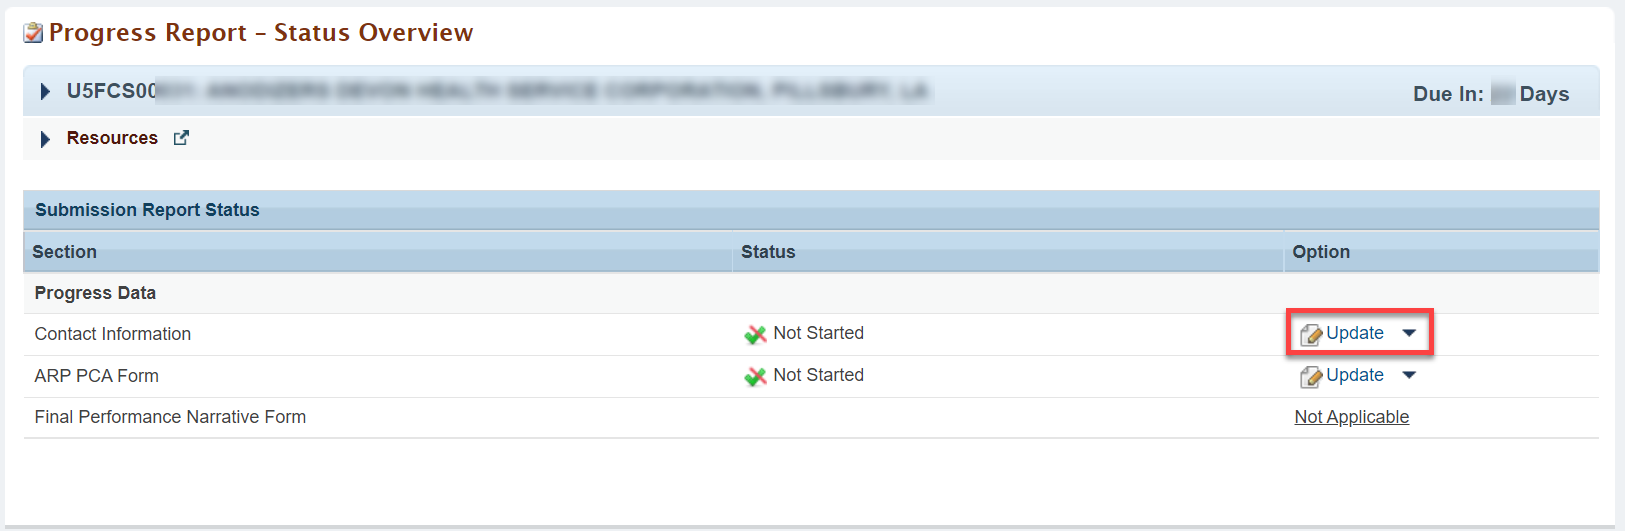 Screenshot of the Progress Report Status Overview page